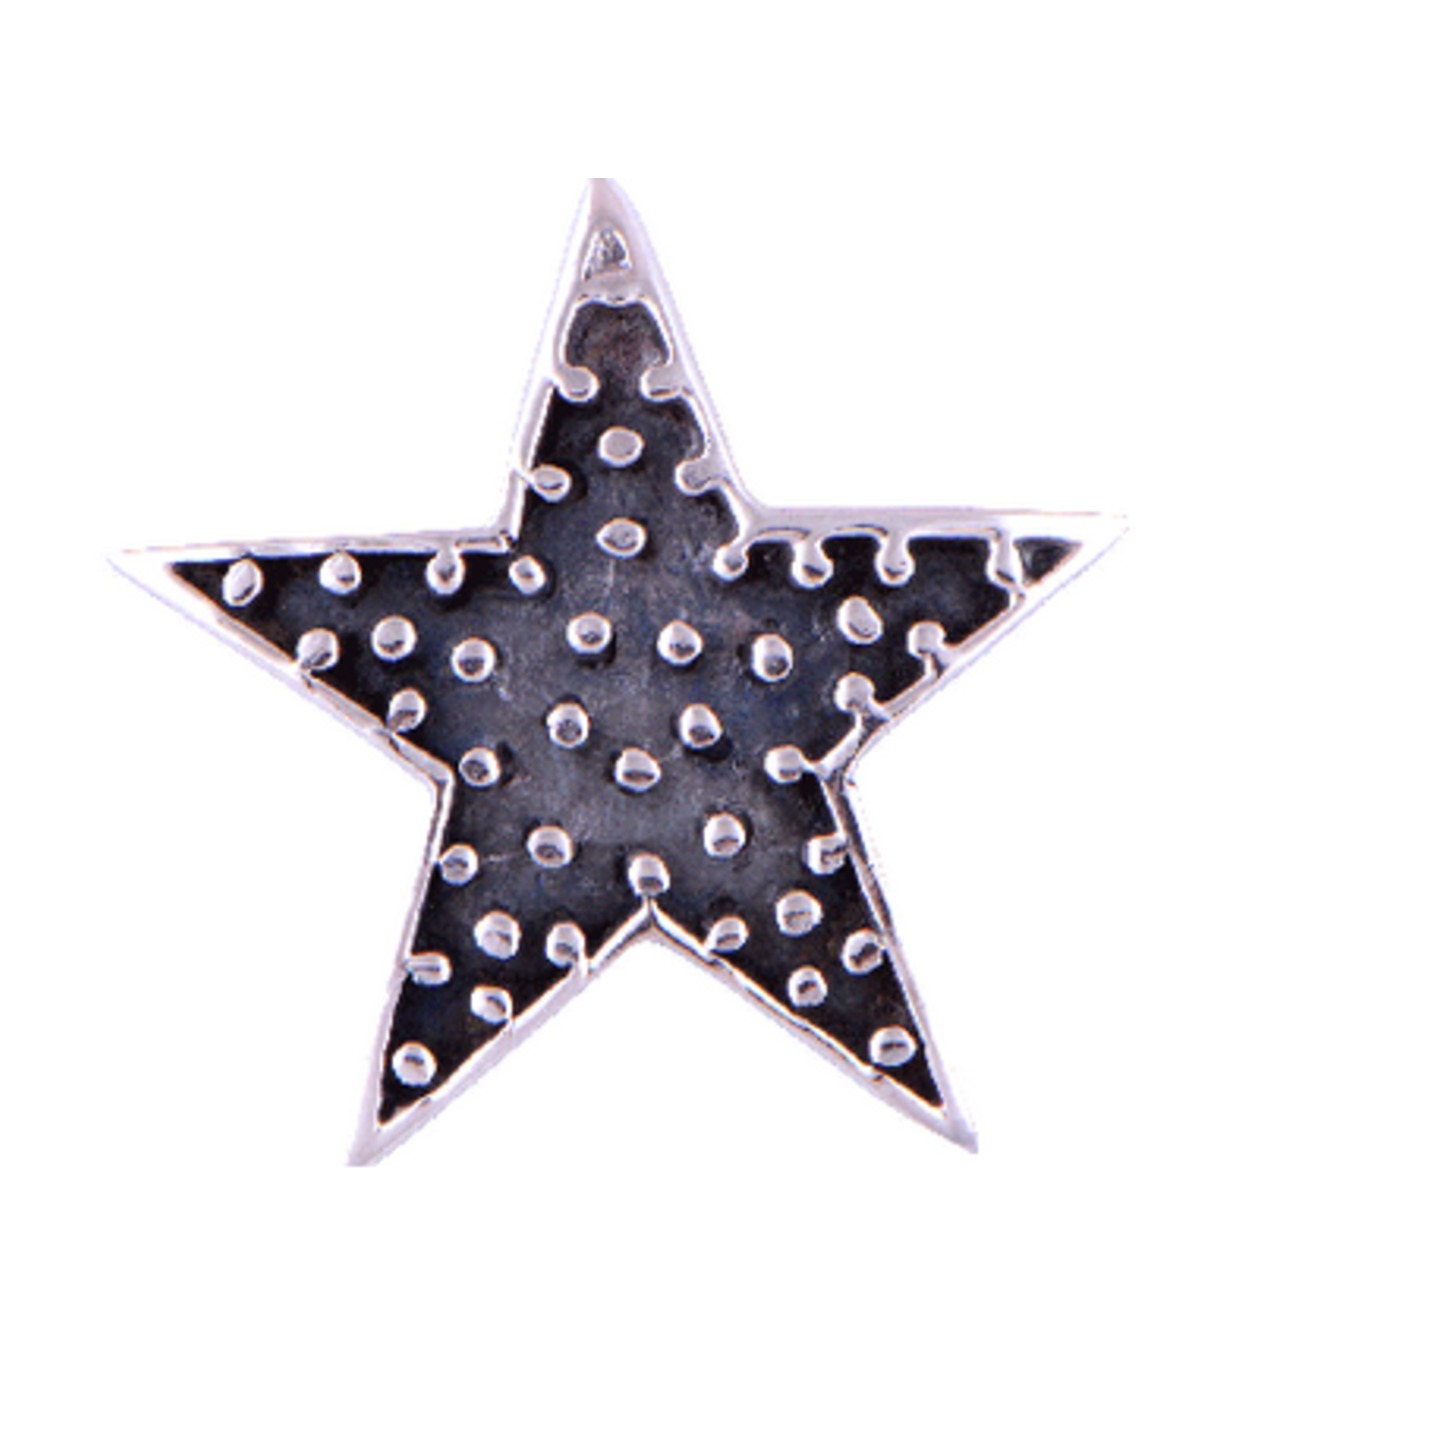 The Twinkling Star Silver Pendant